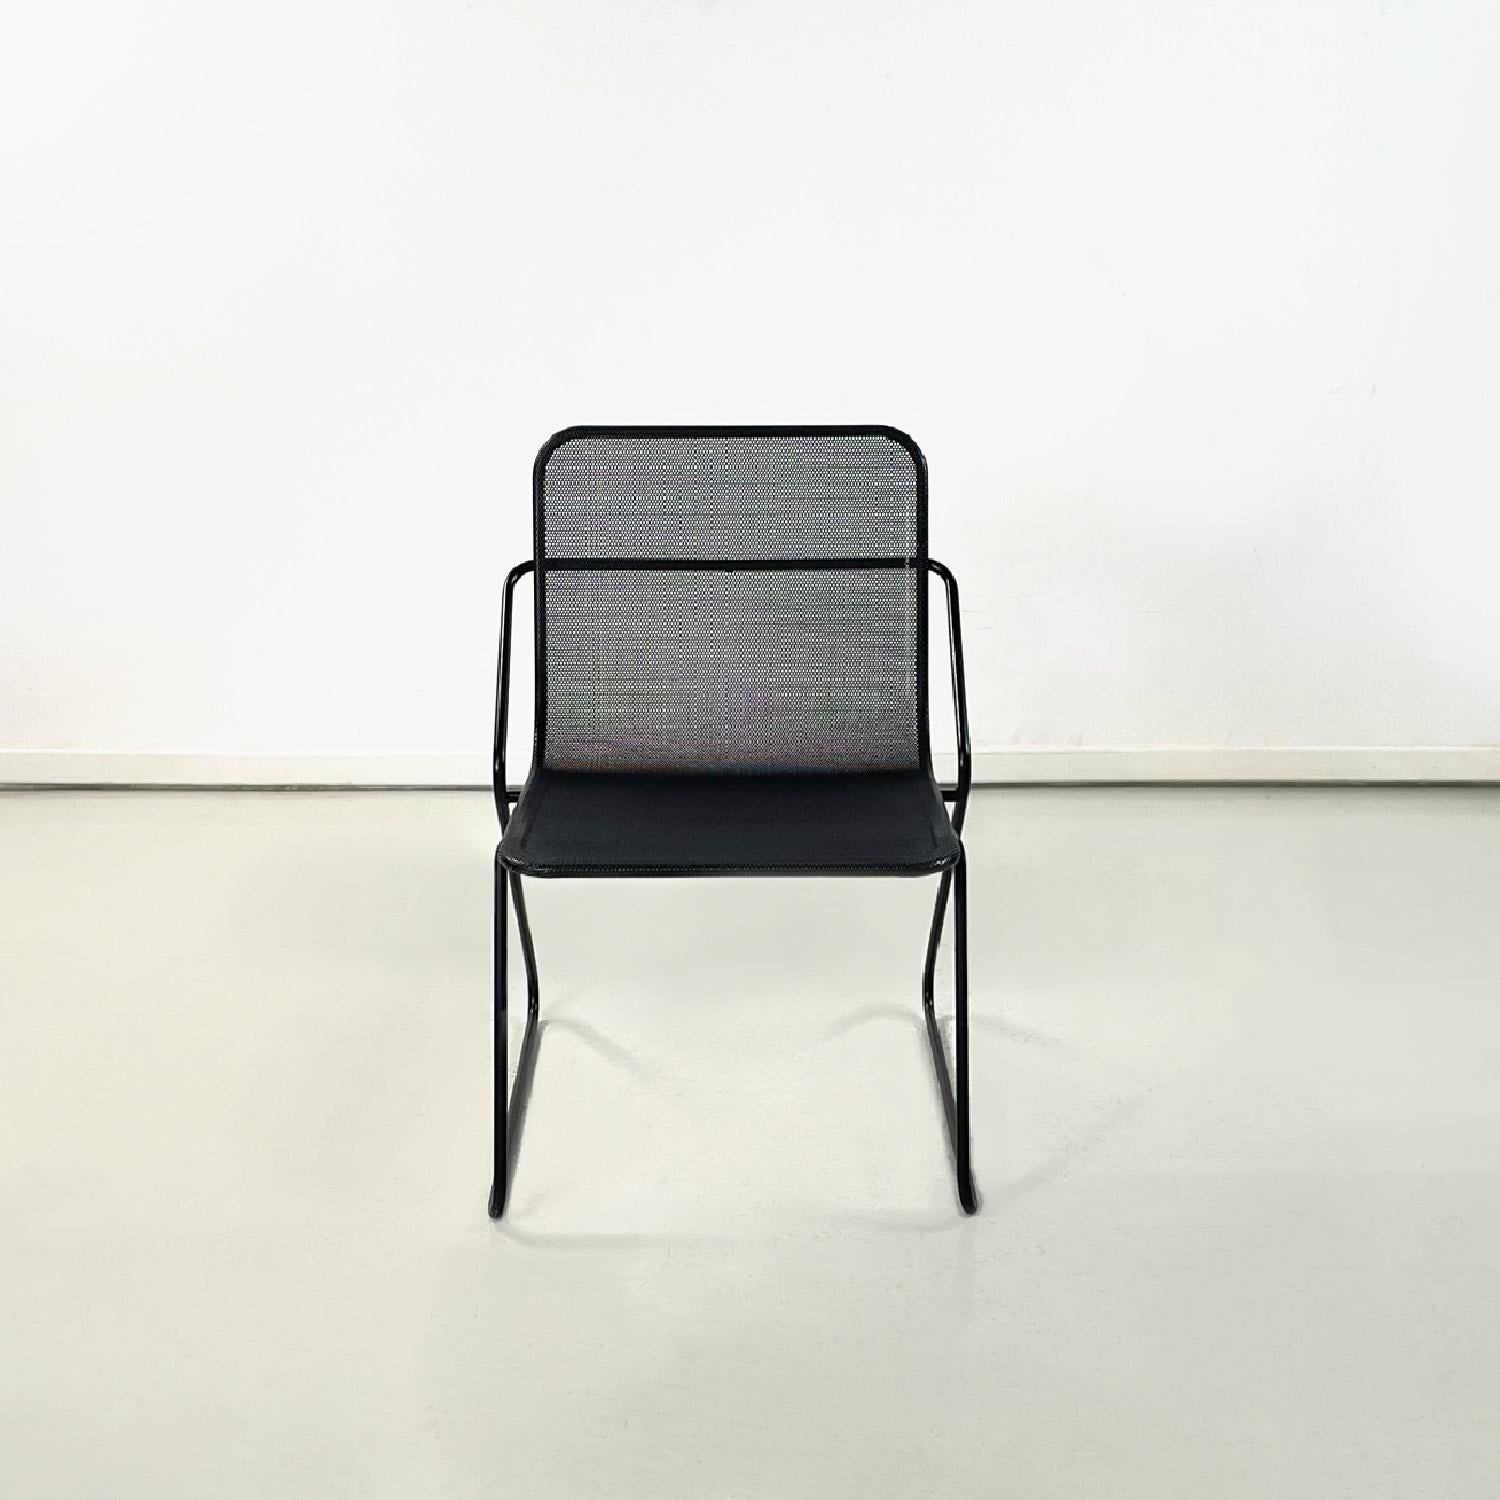 Italian modern metal rod and perforated metal sheet black metal chairs, 1980s
Chairs with a rectangular base in black painted metal rod. The structure is made up of a single metal rod that makes up the triangular shaped legs and the backrest